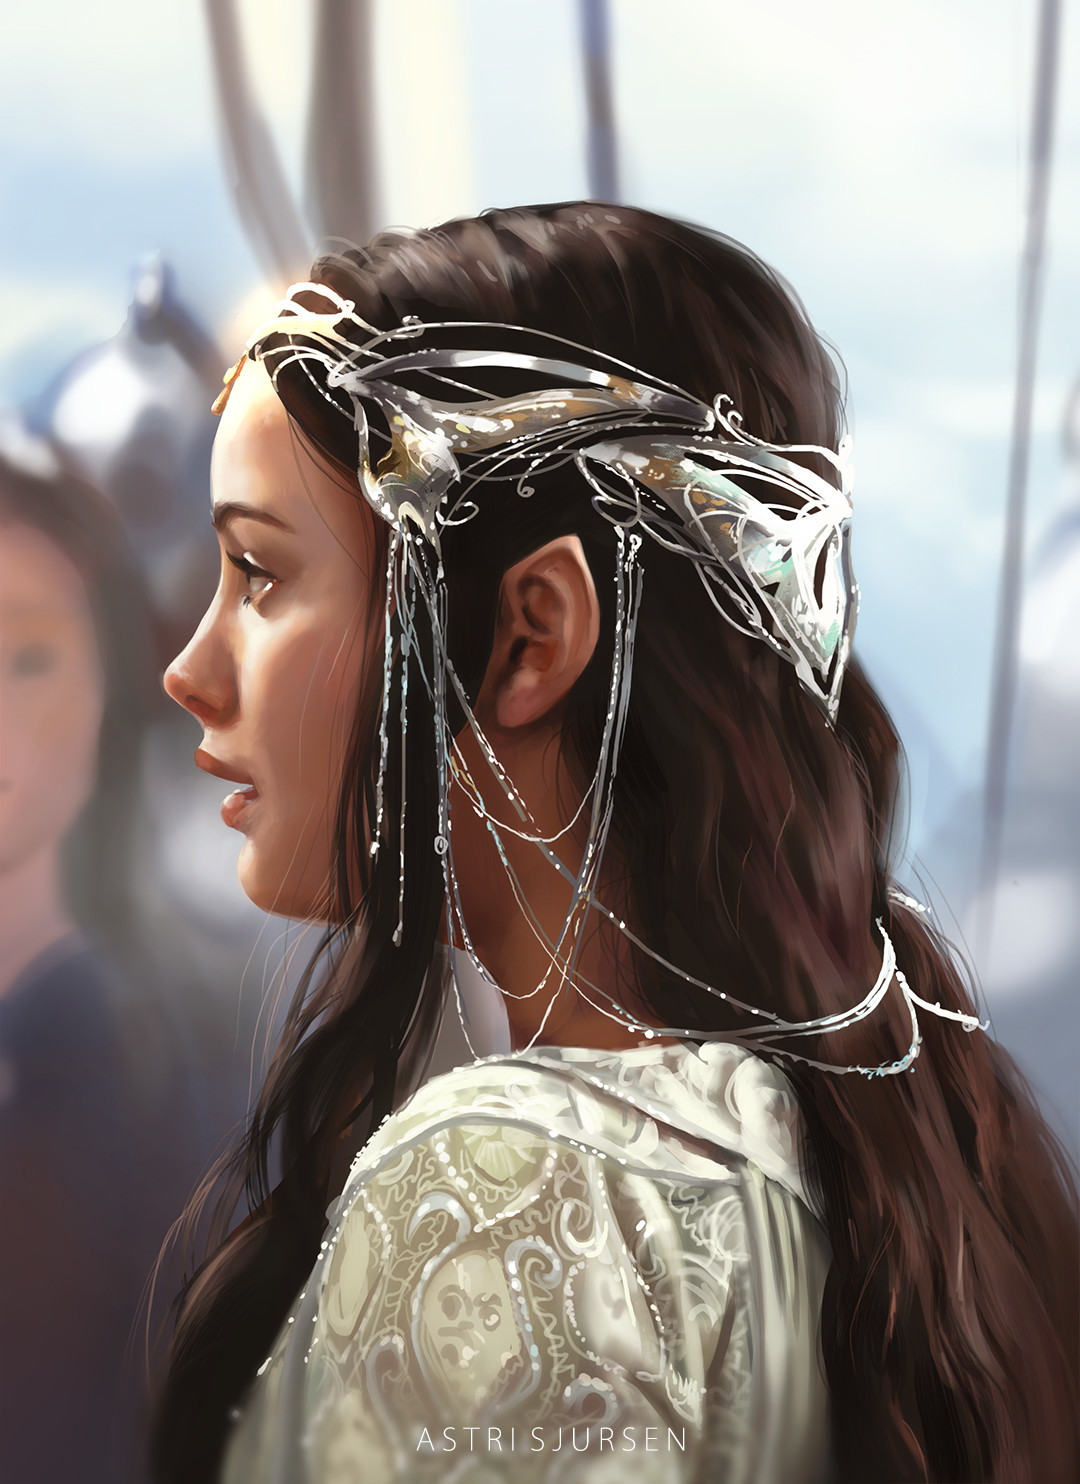 General 1080x1484 Astri Lohne digital art artwork drawing Arwen fictional character The Lord of the Rings elves pointy ears Liv Tyler portrait display Gondor J. R. R. Tolkien